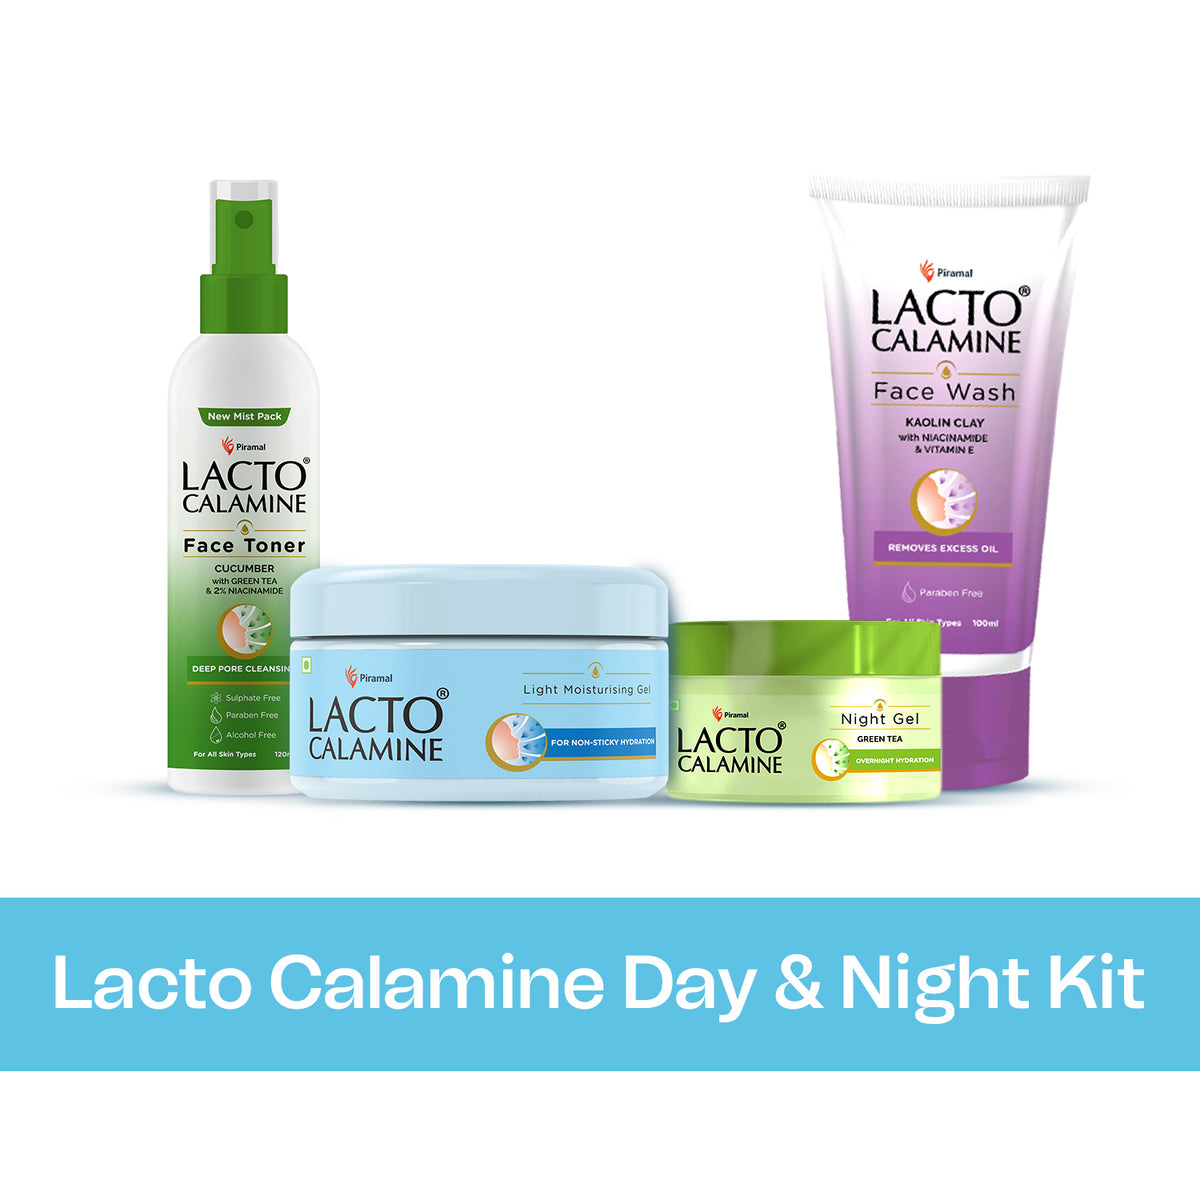 Lacto Calamine Day and Night Skin care Kit for Women | 4 essential product set | Facewash, Toner, Light Moisturising Gel & Night Gel | Radiance Routine for Oily Skin